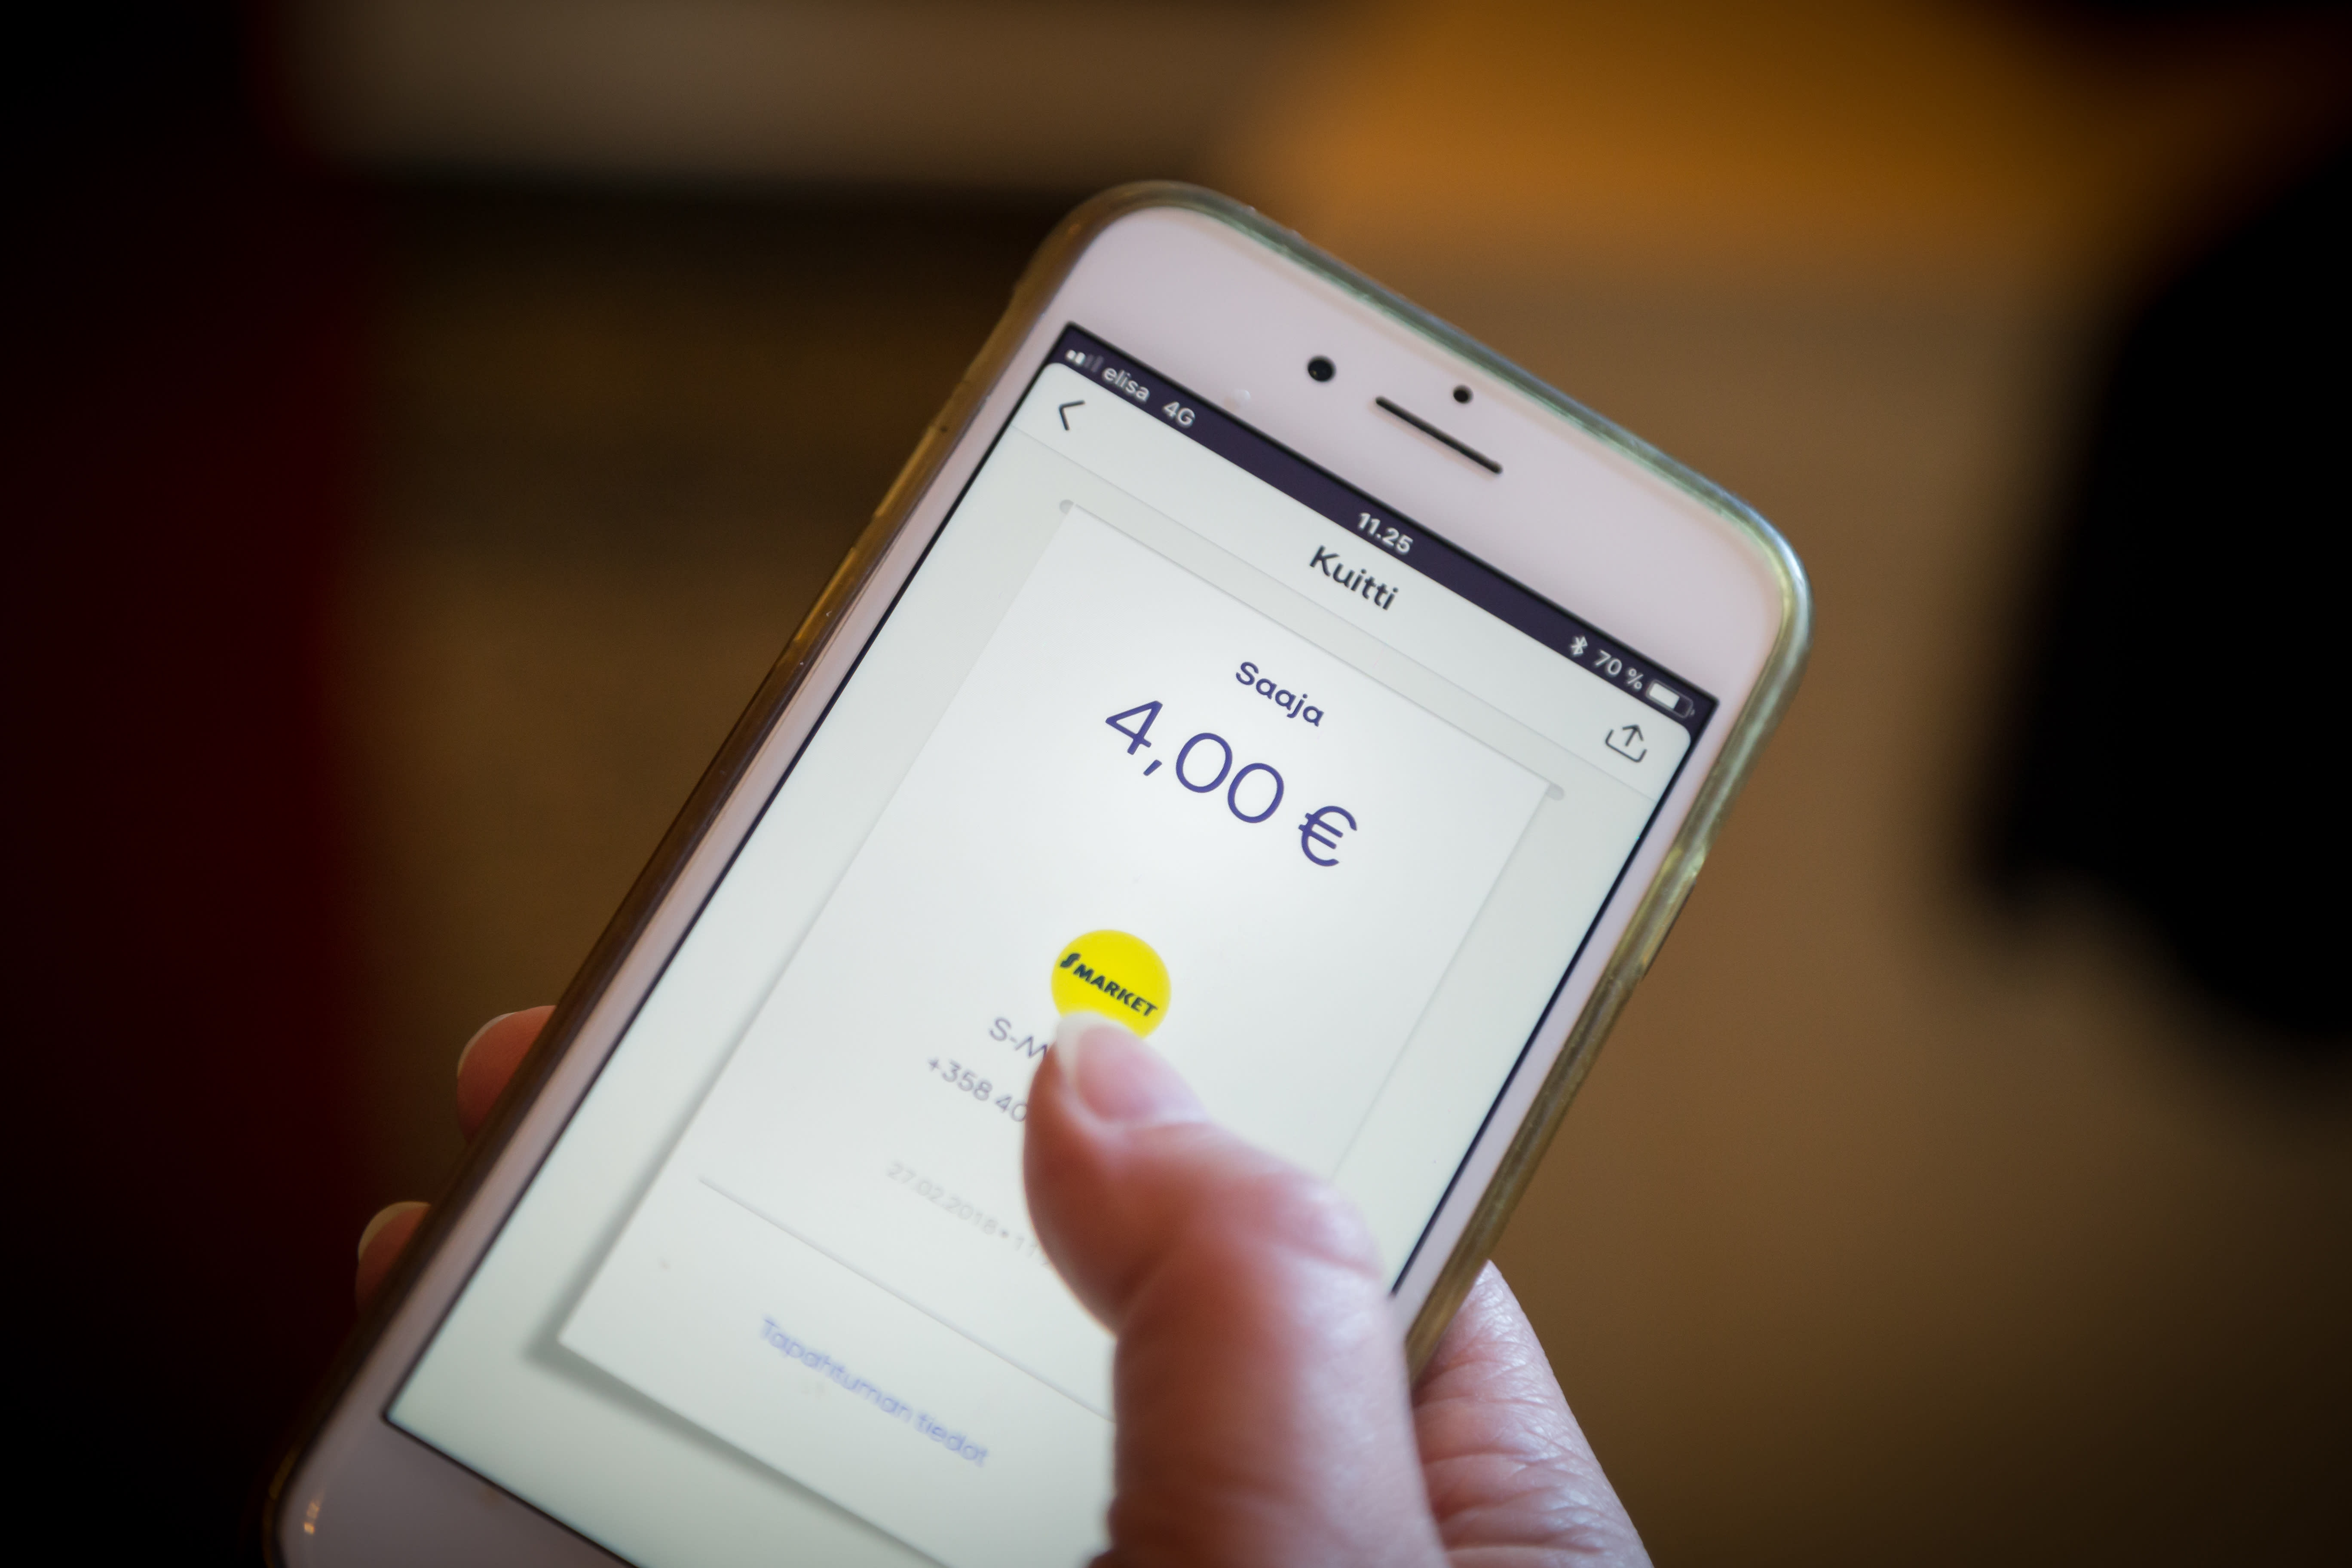 Mobilepay: User fees may affect Denmark, but not Finland